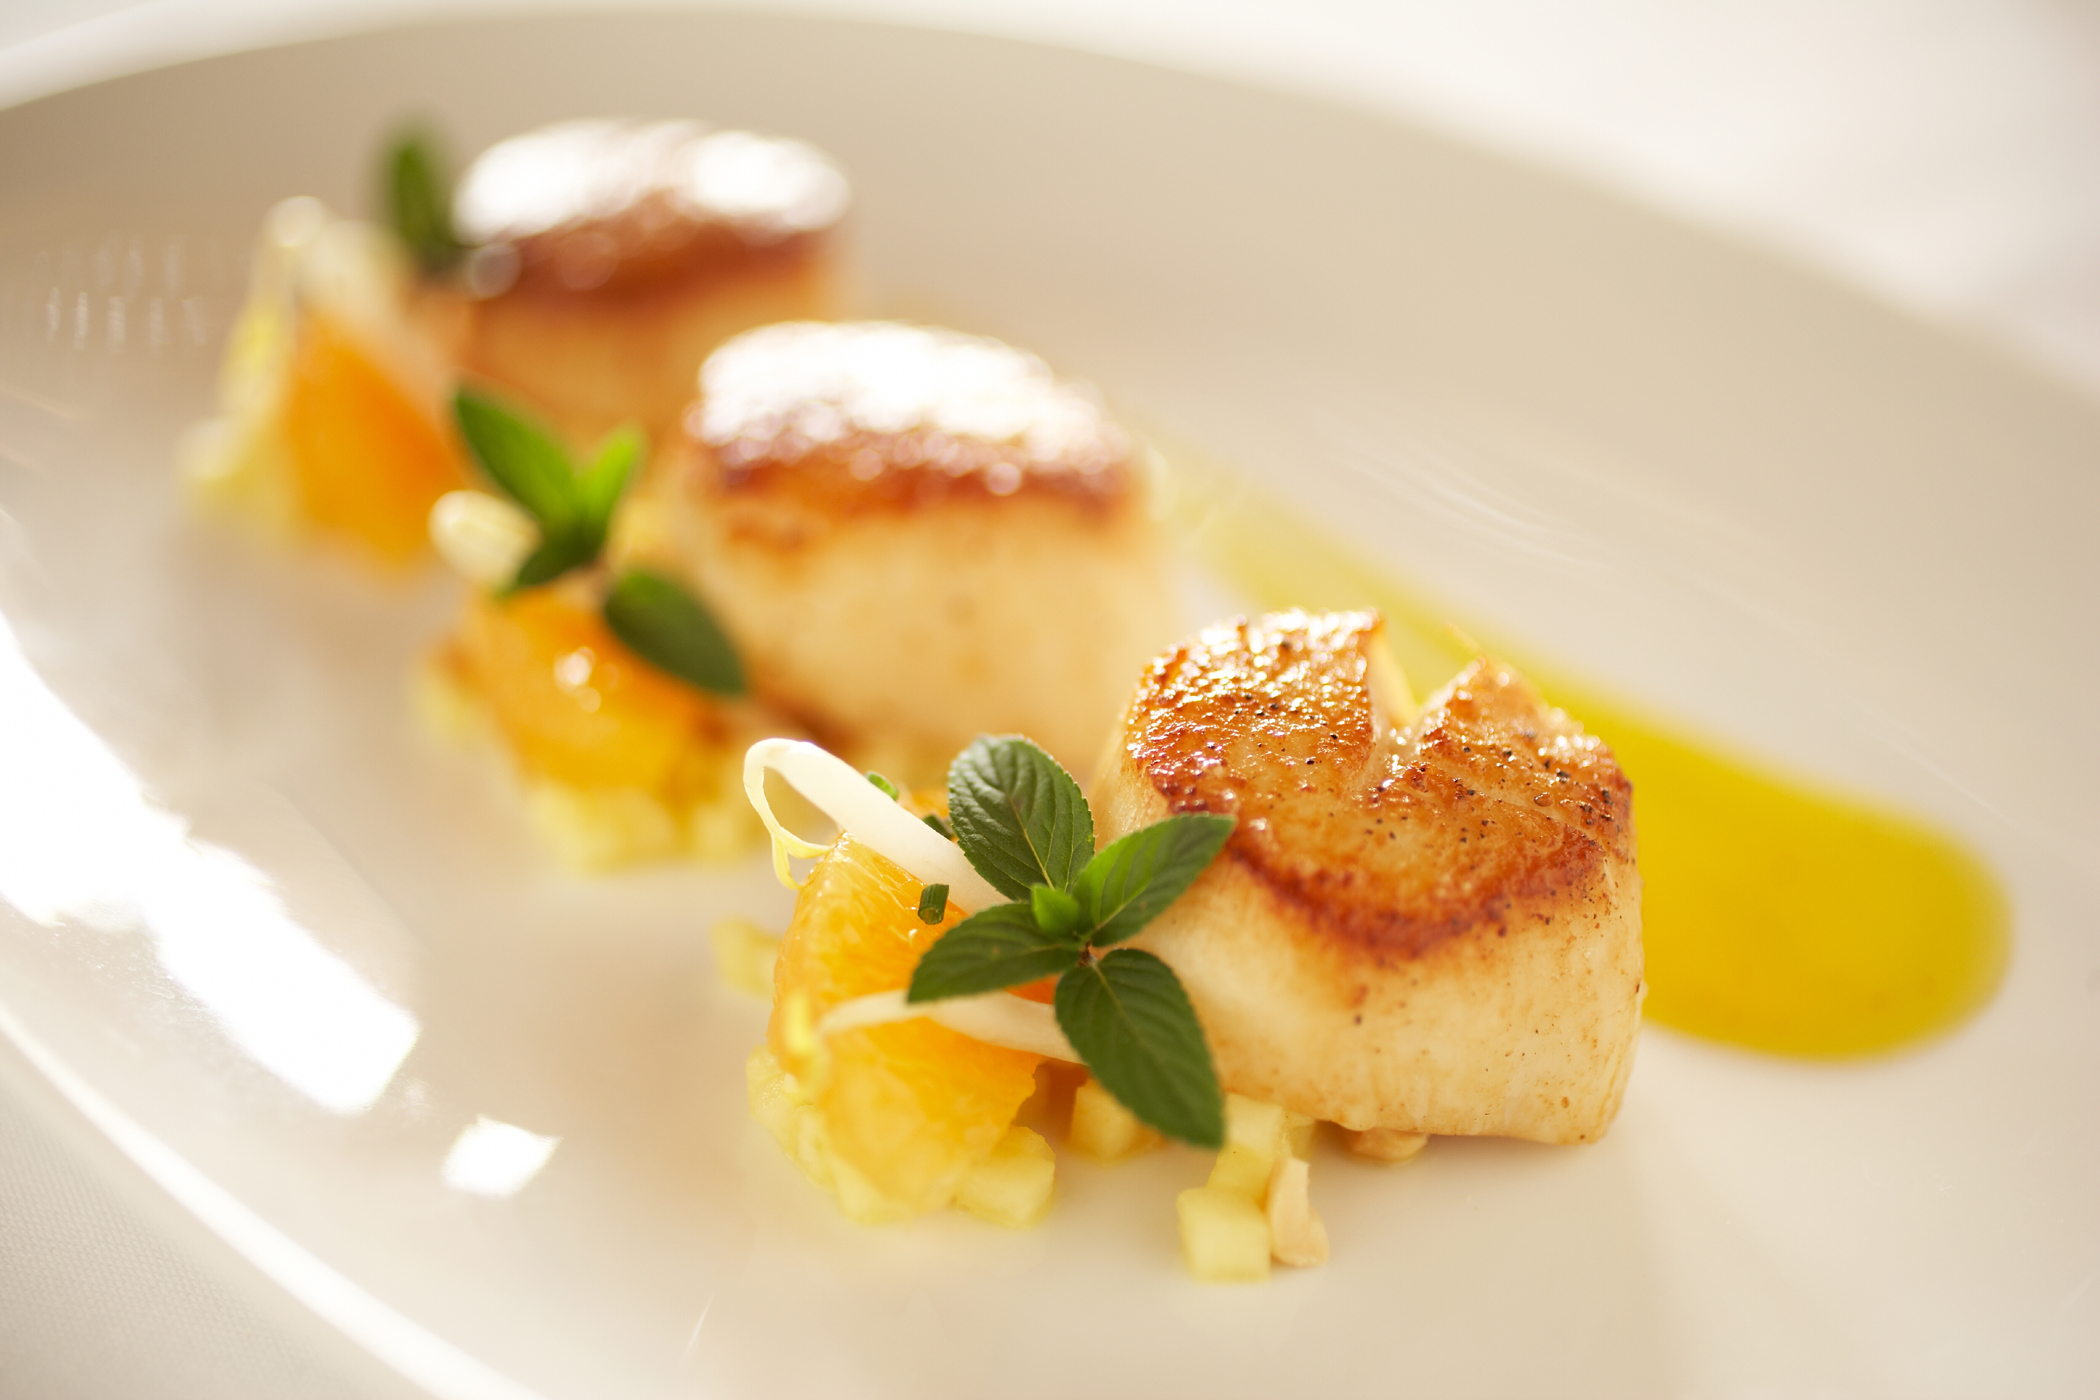 Perfectly Cooked Scallops at Auberge du Soleil Restaurant